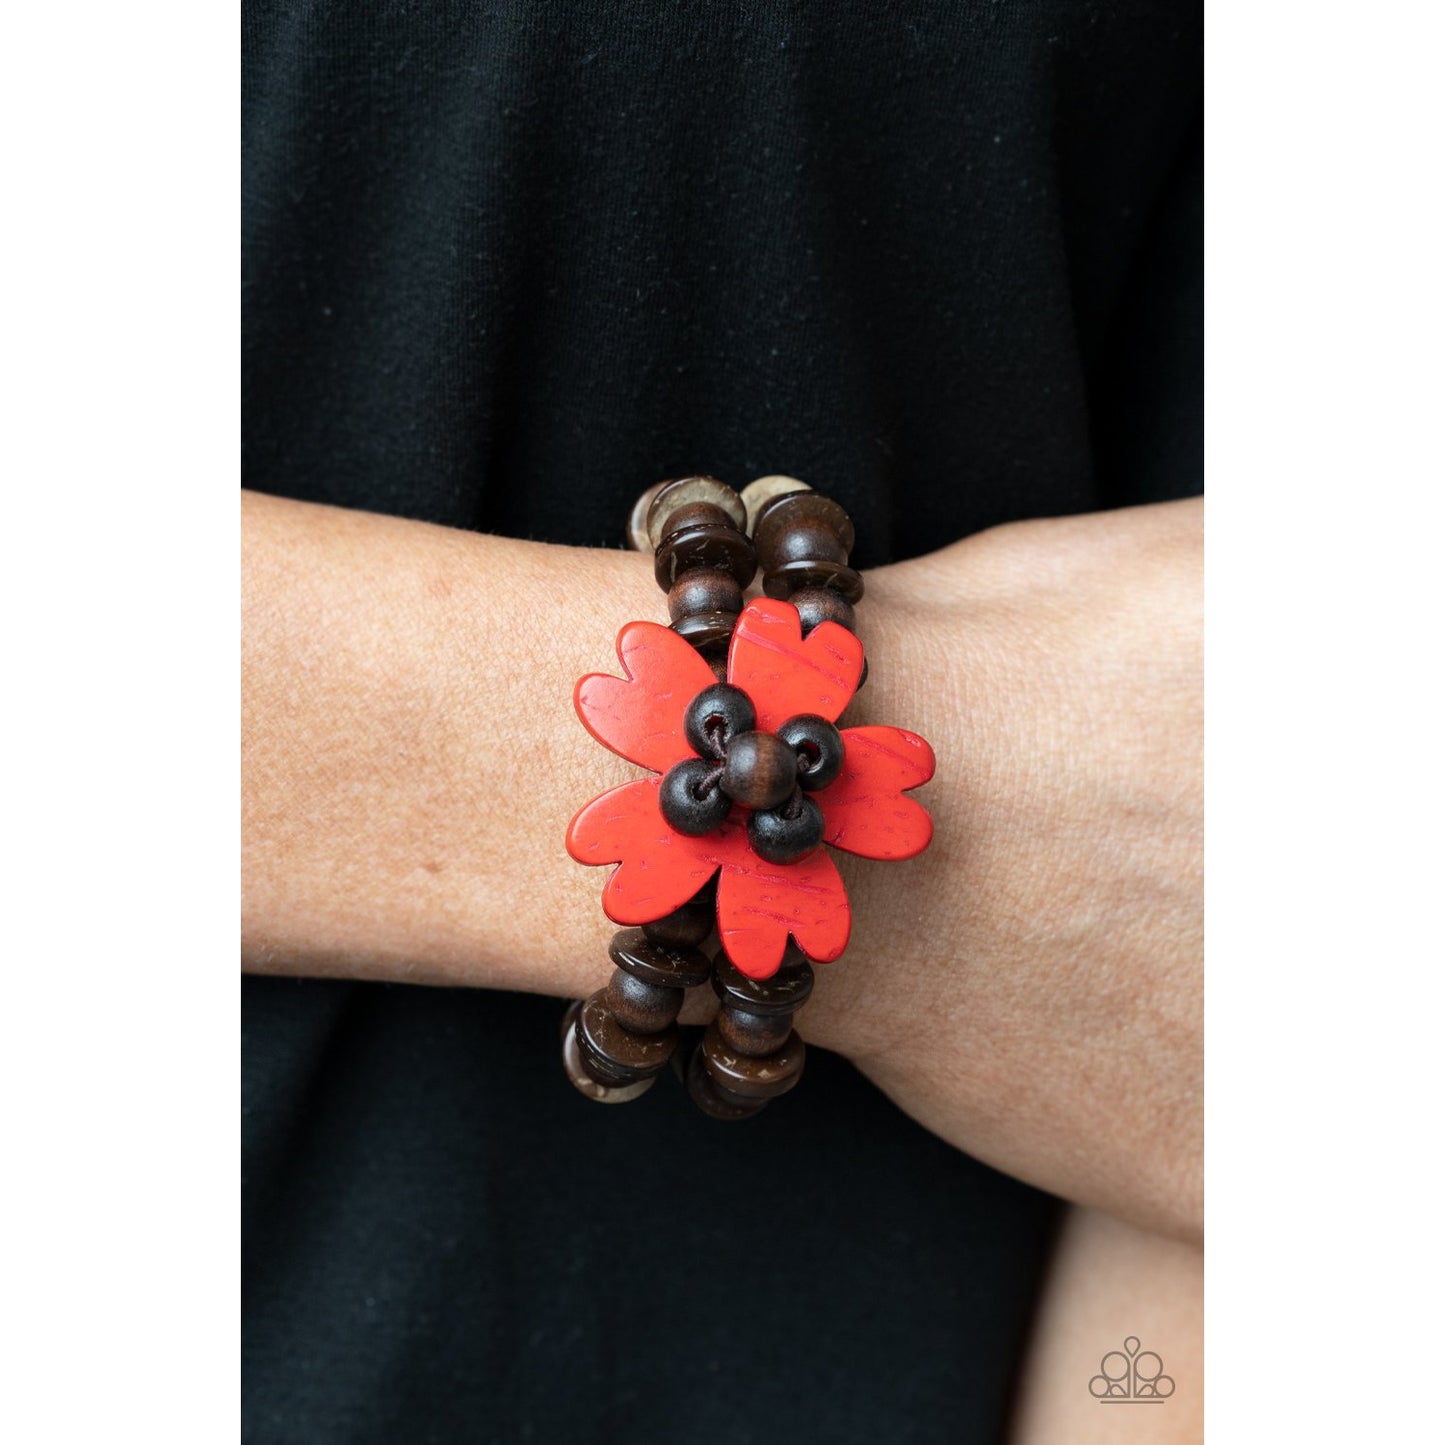 Tropical Flavor - Red and Brown Wooden Beads Bracelet - Paparazzi Accessories - GlaMarous Titi Jewels